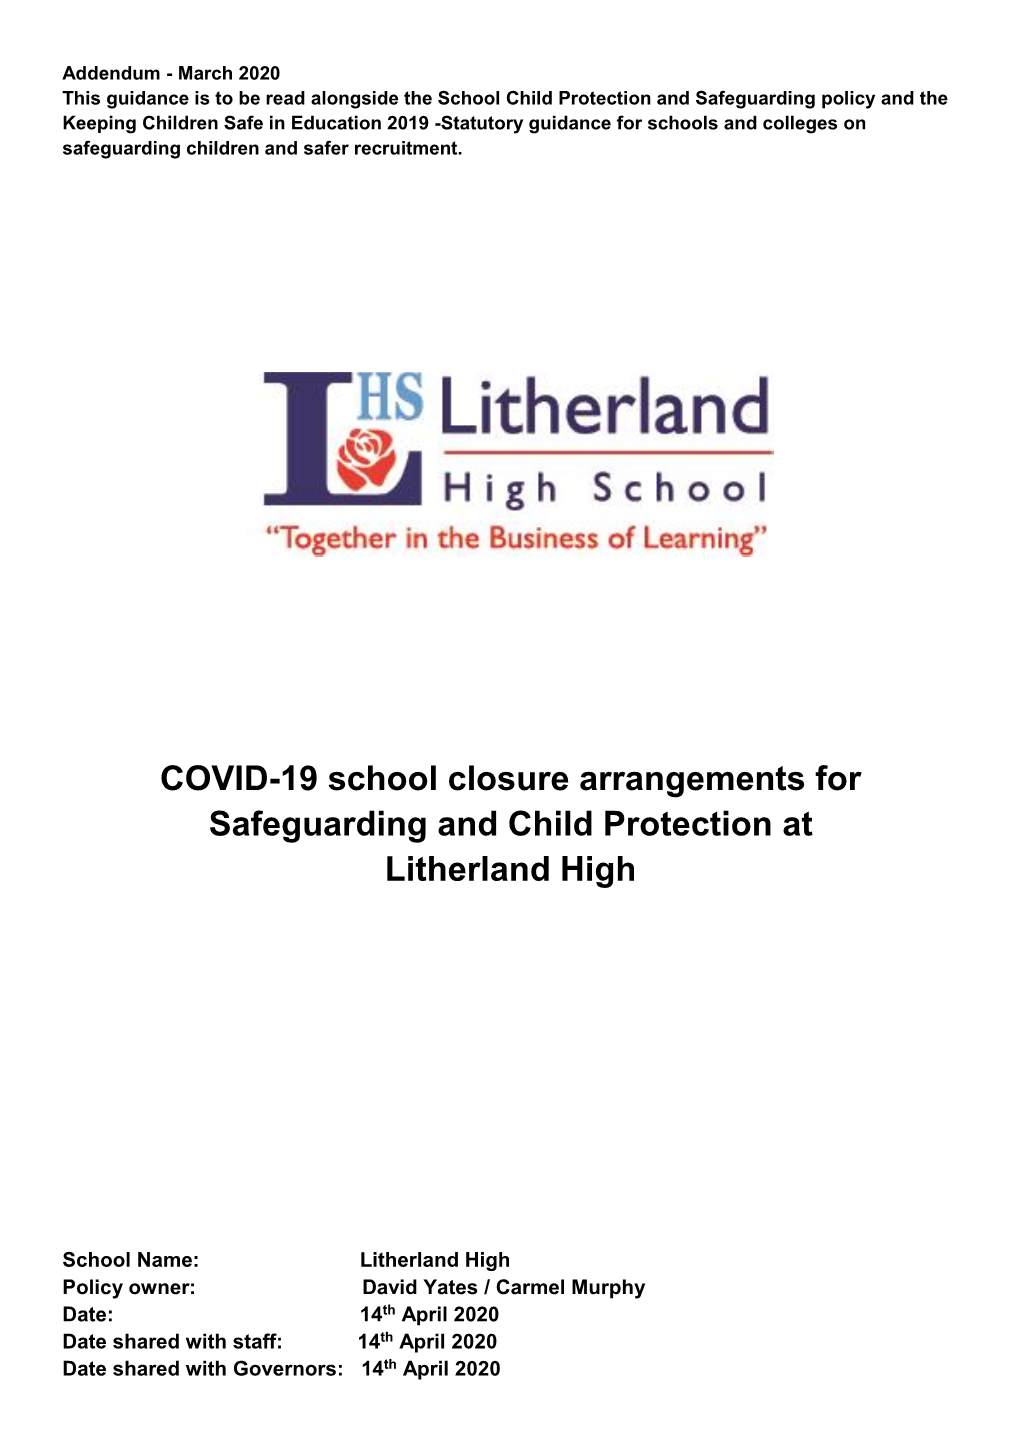 COVID-19 School Closure Arrangements for Safeguarding and Child Protection at Litherland High